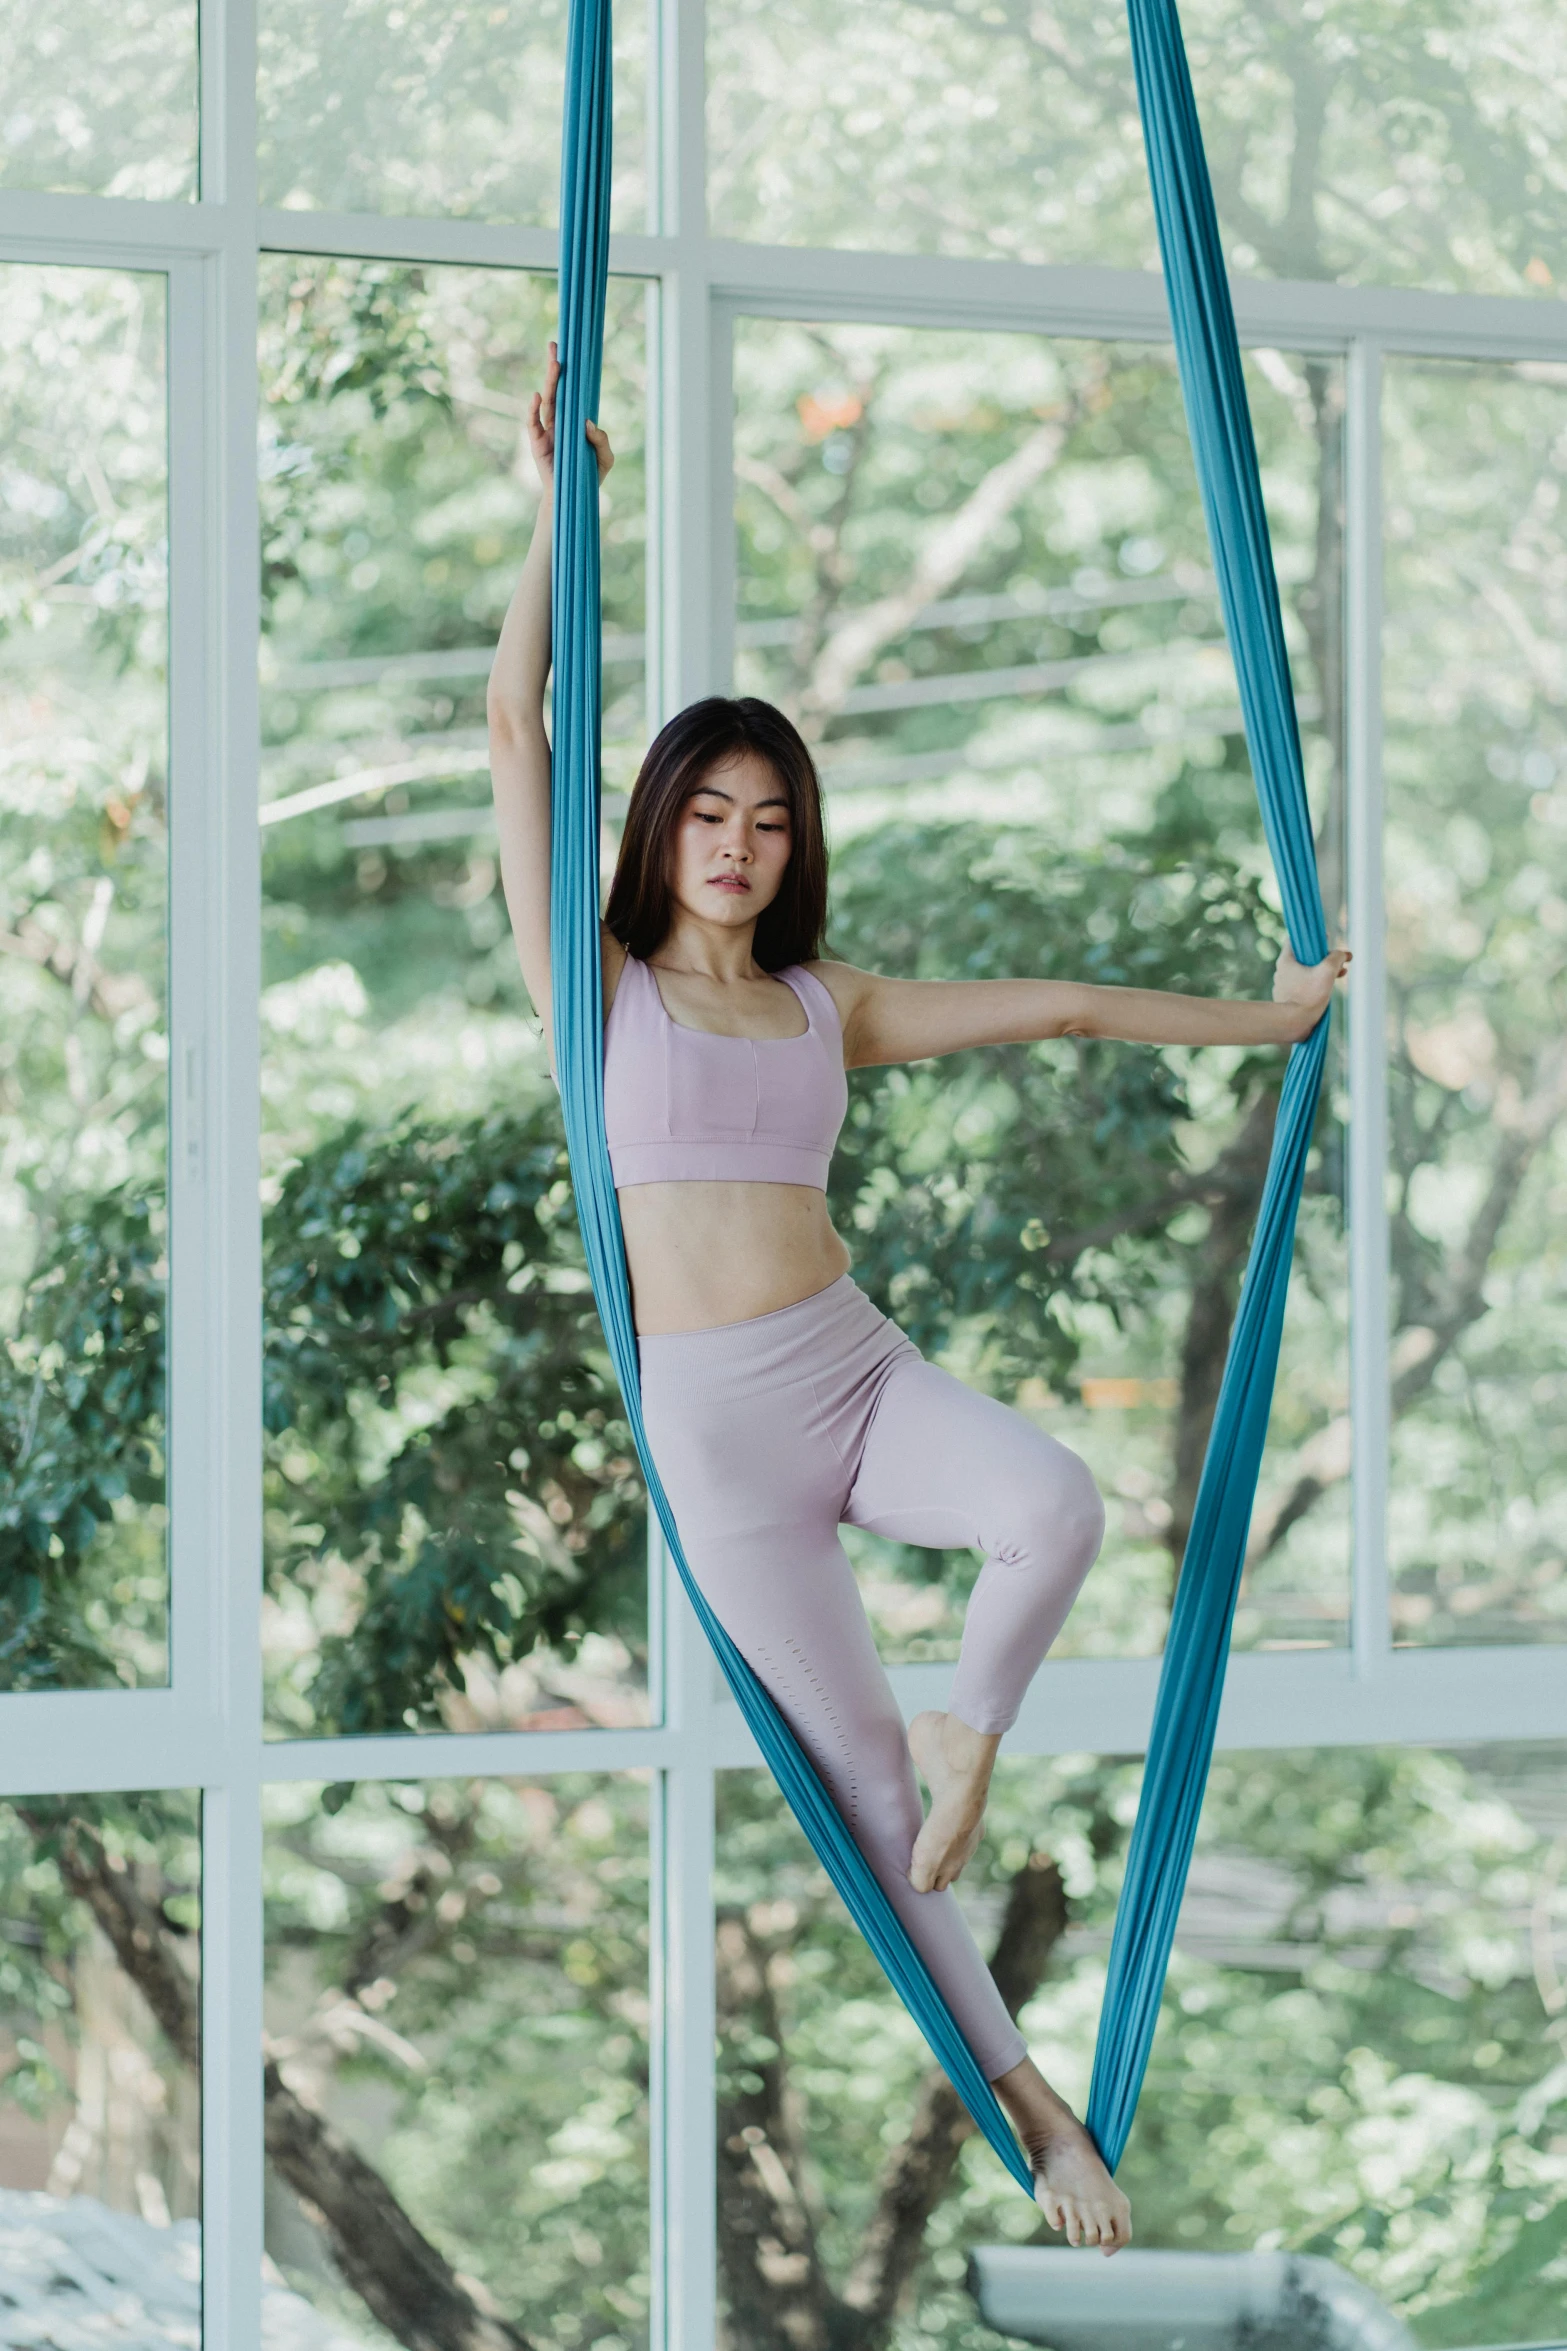 an attractive woman standing on a hammock, looking out the window